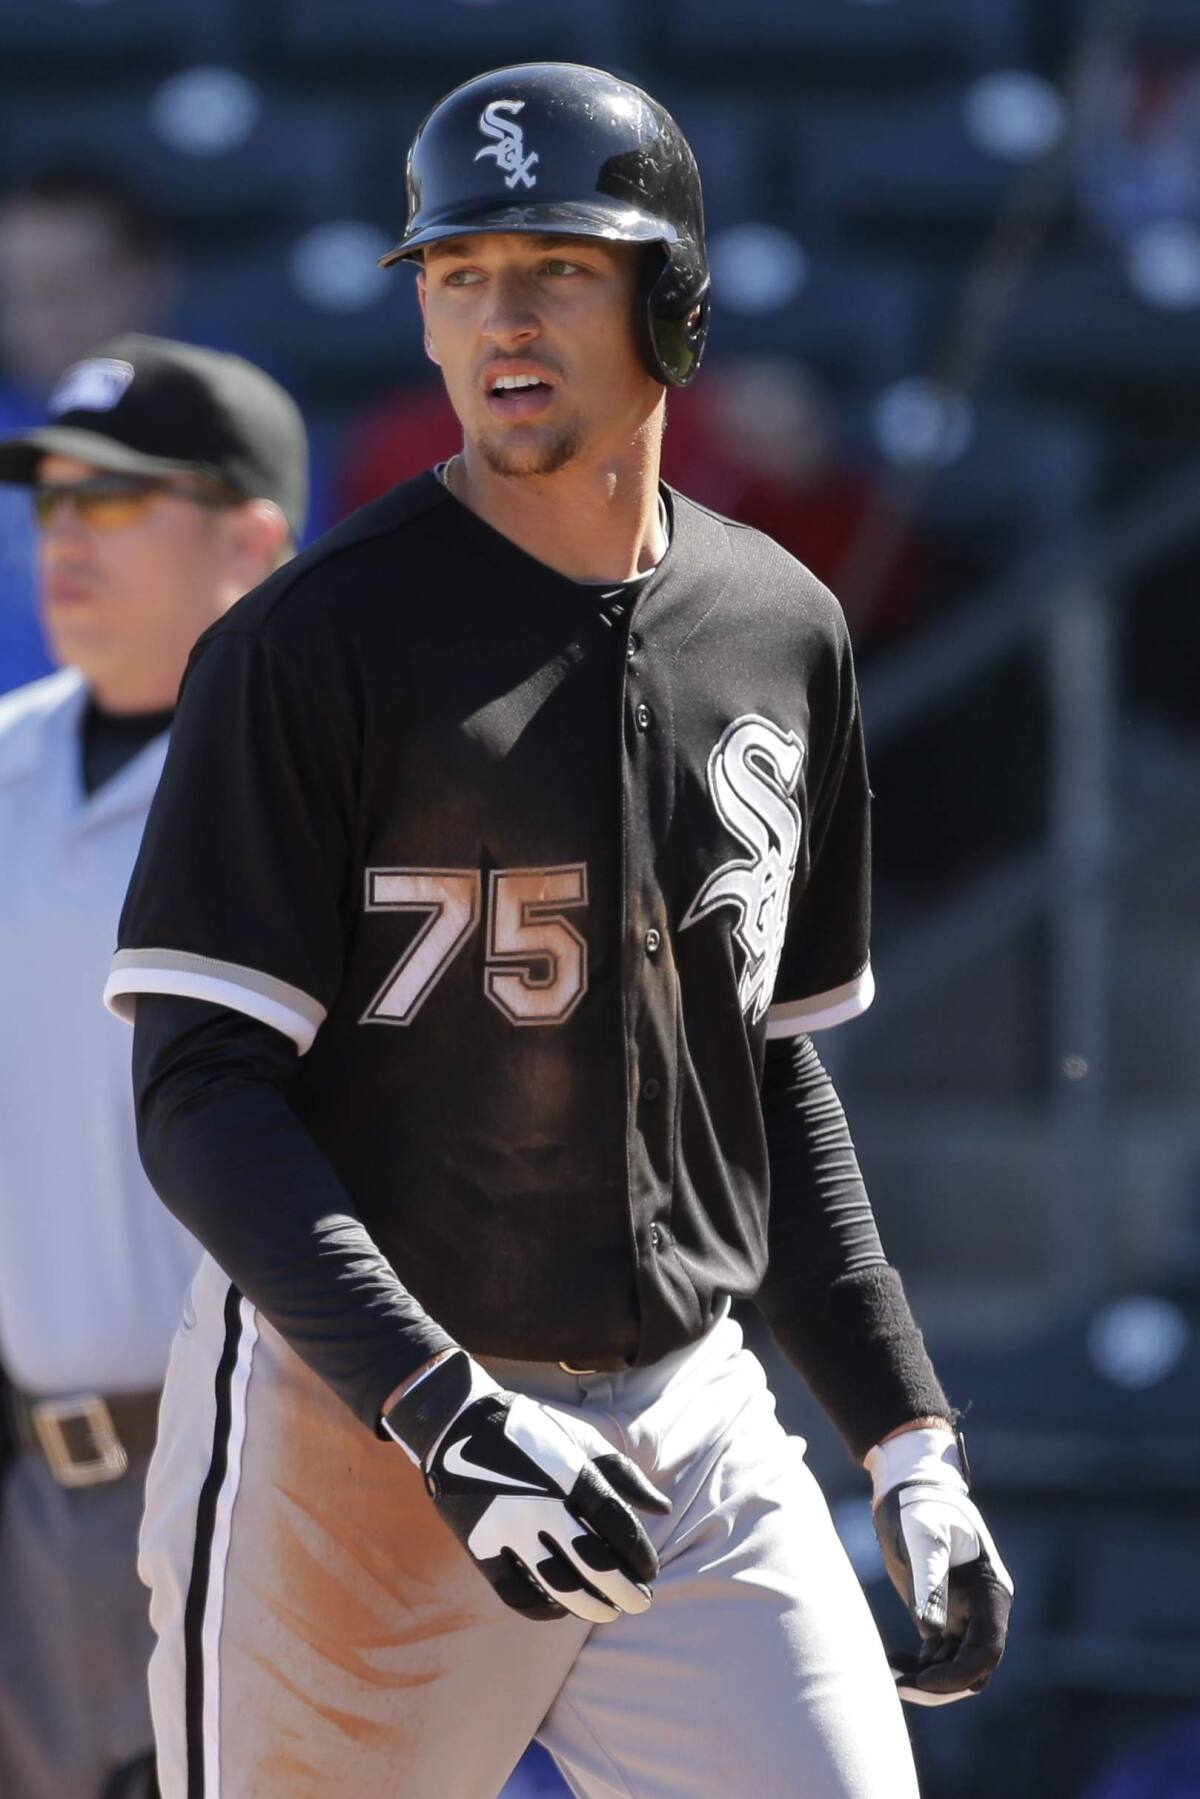 Trayce Thompson homers, drives in two as Birmingham Barons top